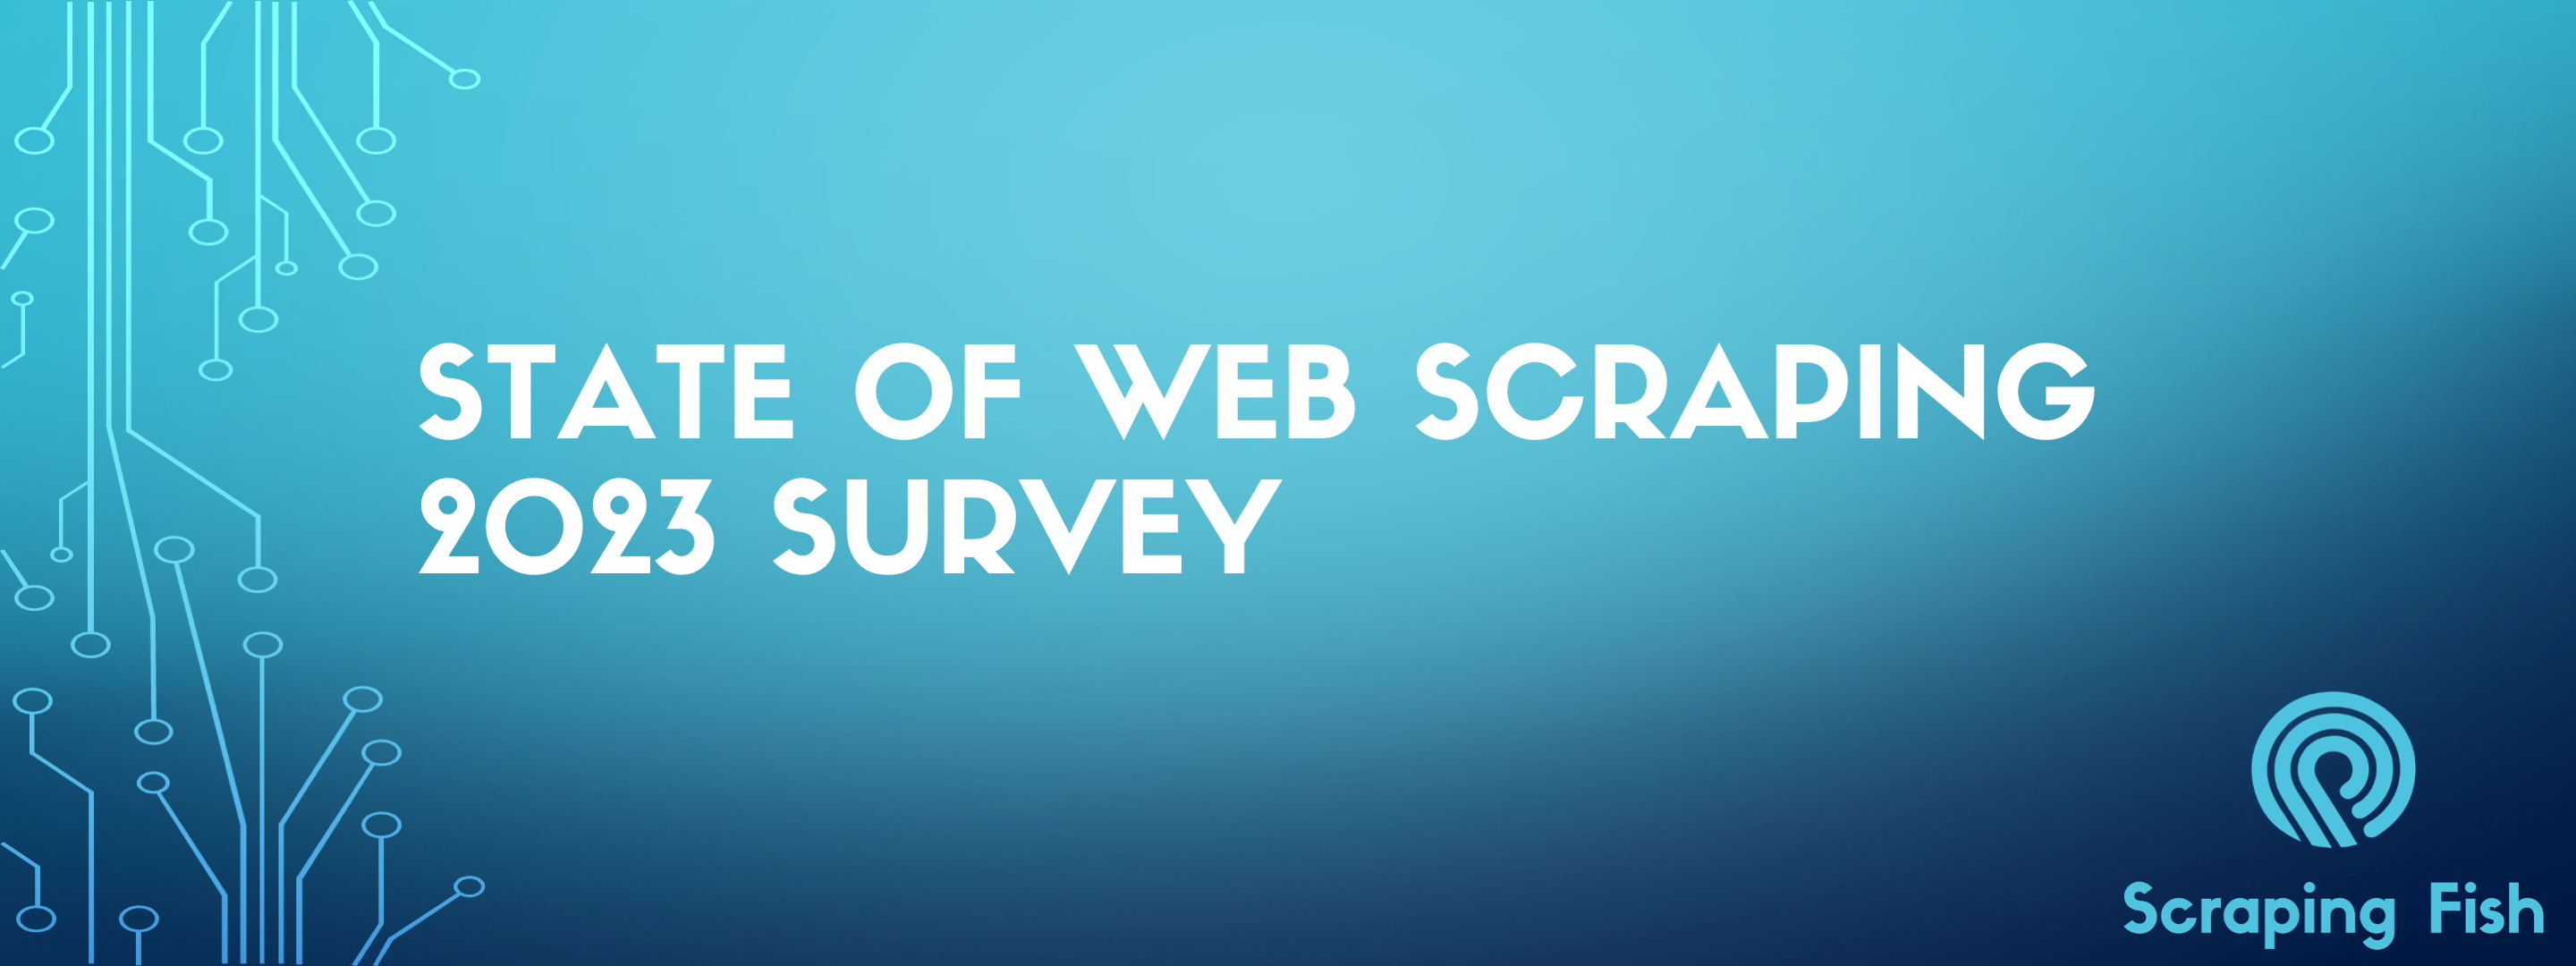 State of Web Scraping 2023 Survey Results